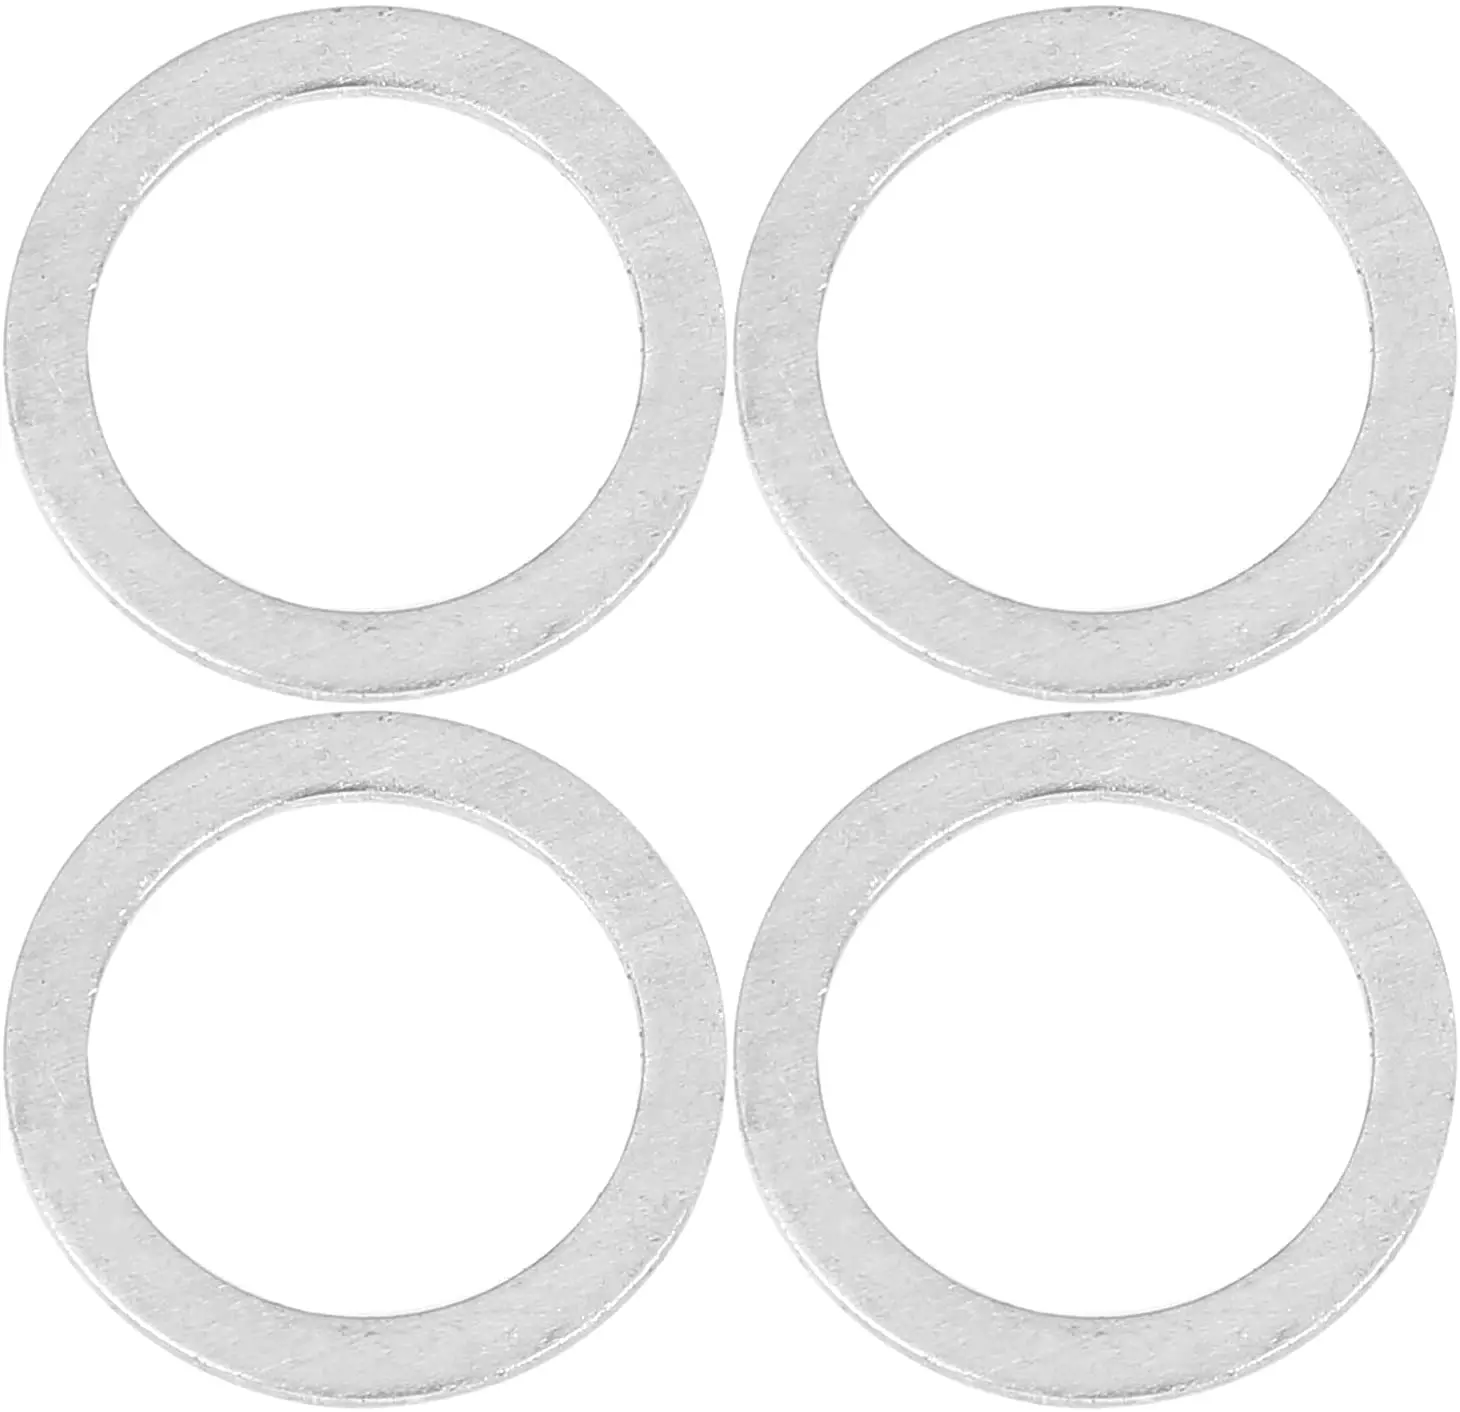 10x Wrenchturn Engine Oil Drain Plug Gaskets for Volvo replaces 977751 